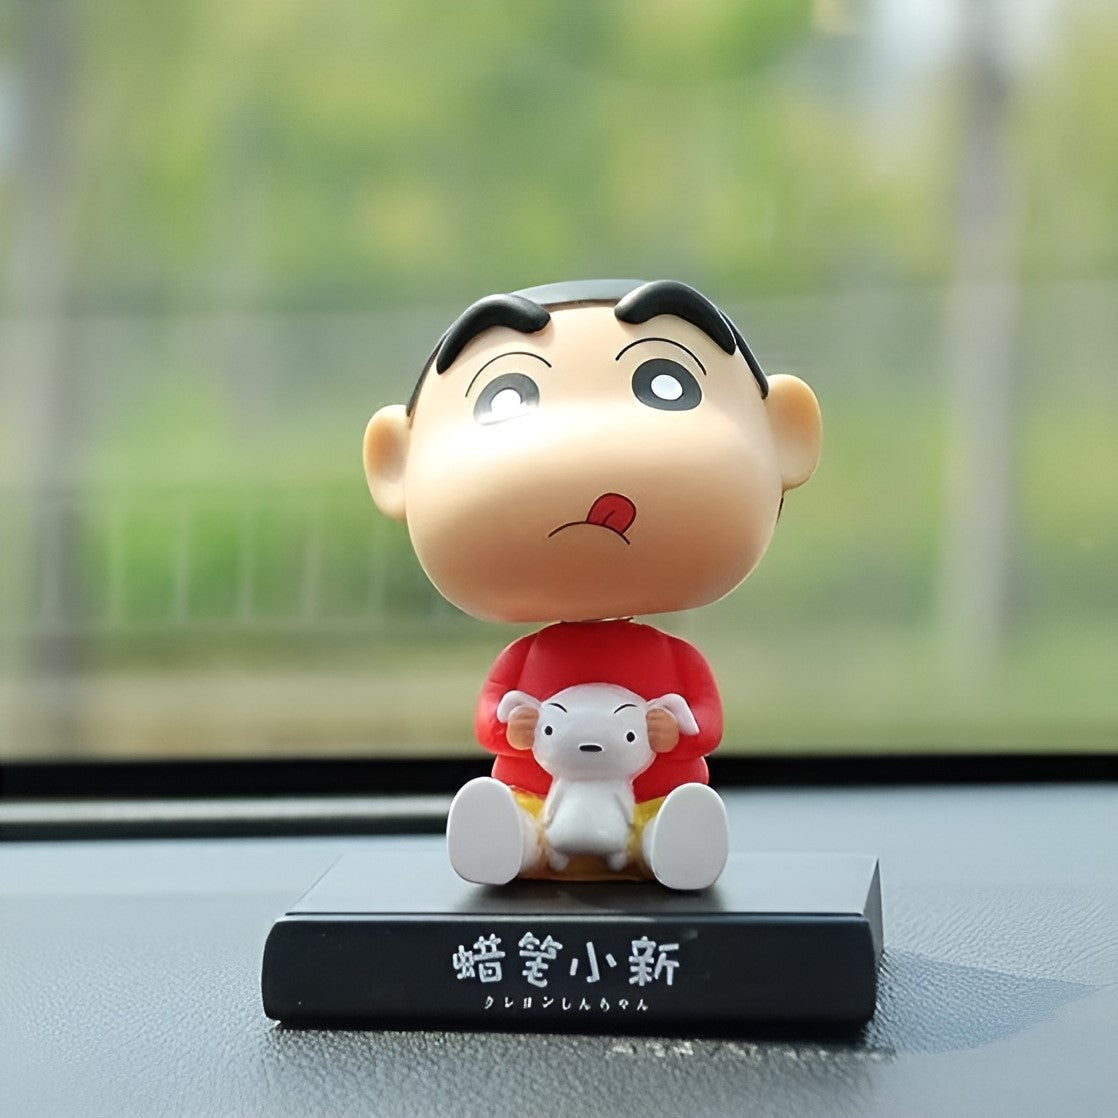 Shinchan With Shiro Bobblehead With Mobile Holder For Cars |14CM|